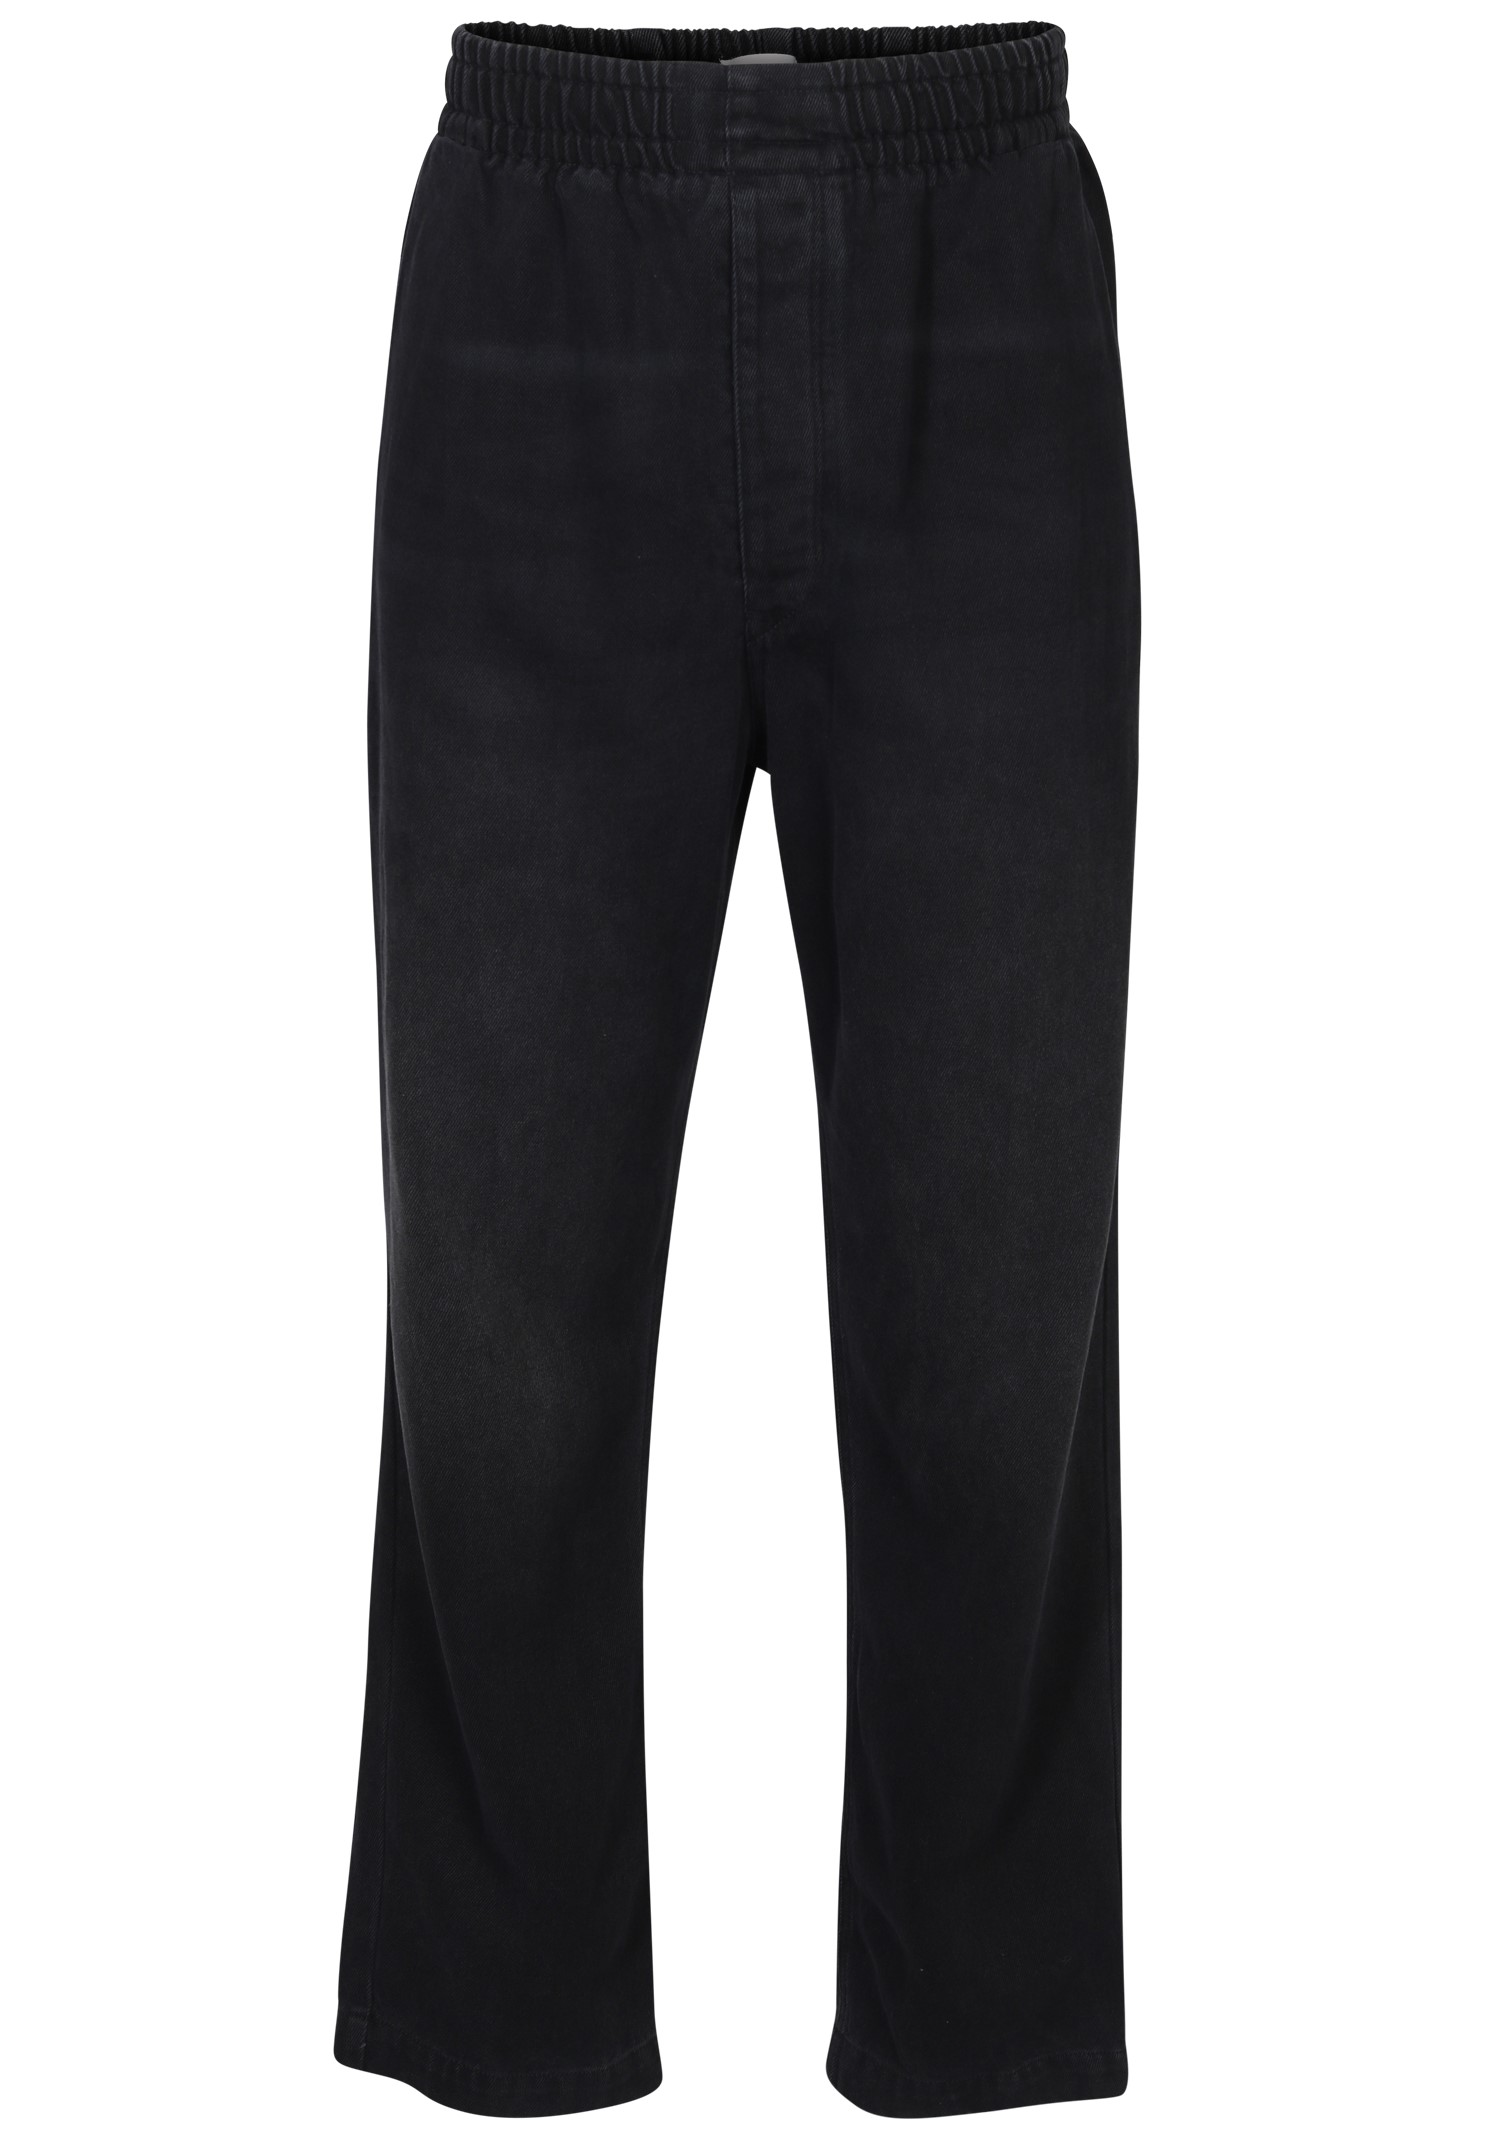 ISABEL MARANT Timeo Pant in Faded Black L